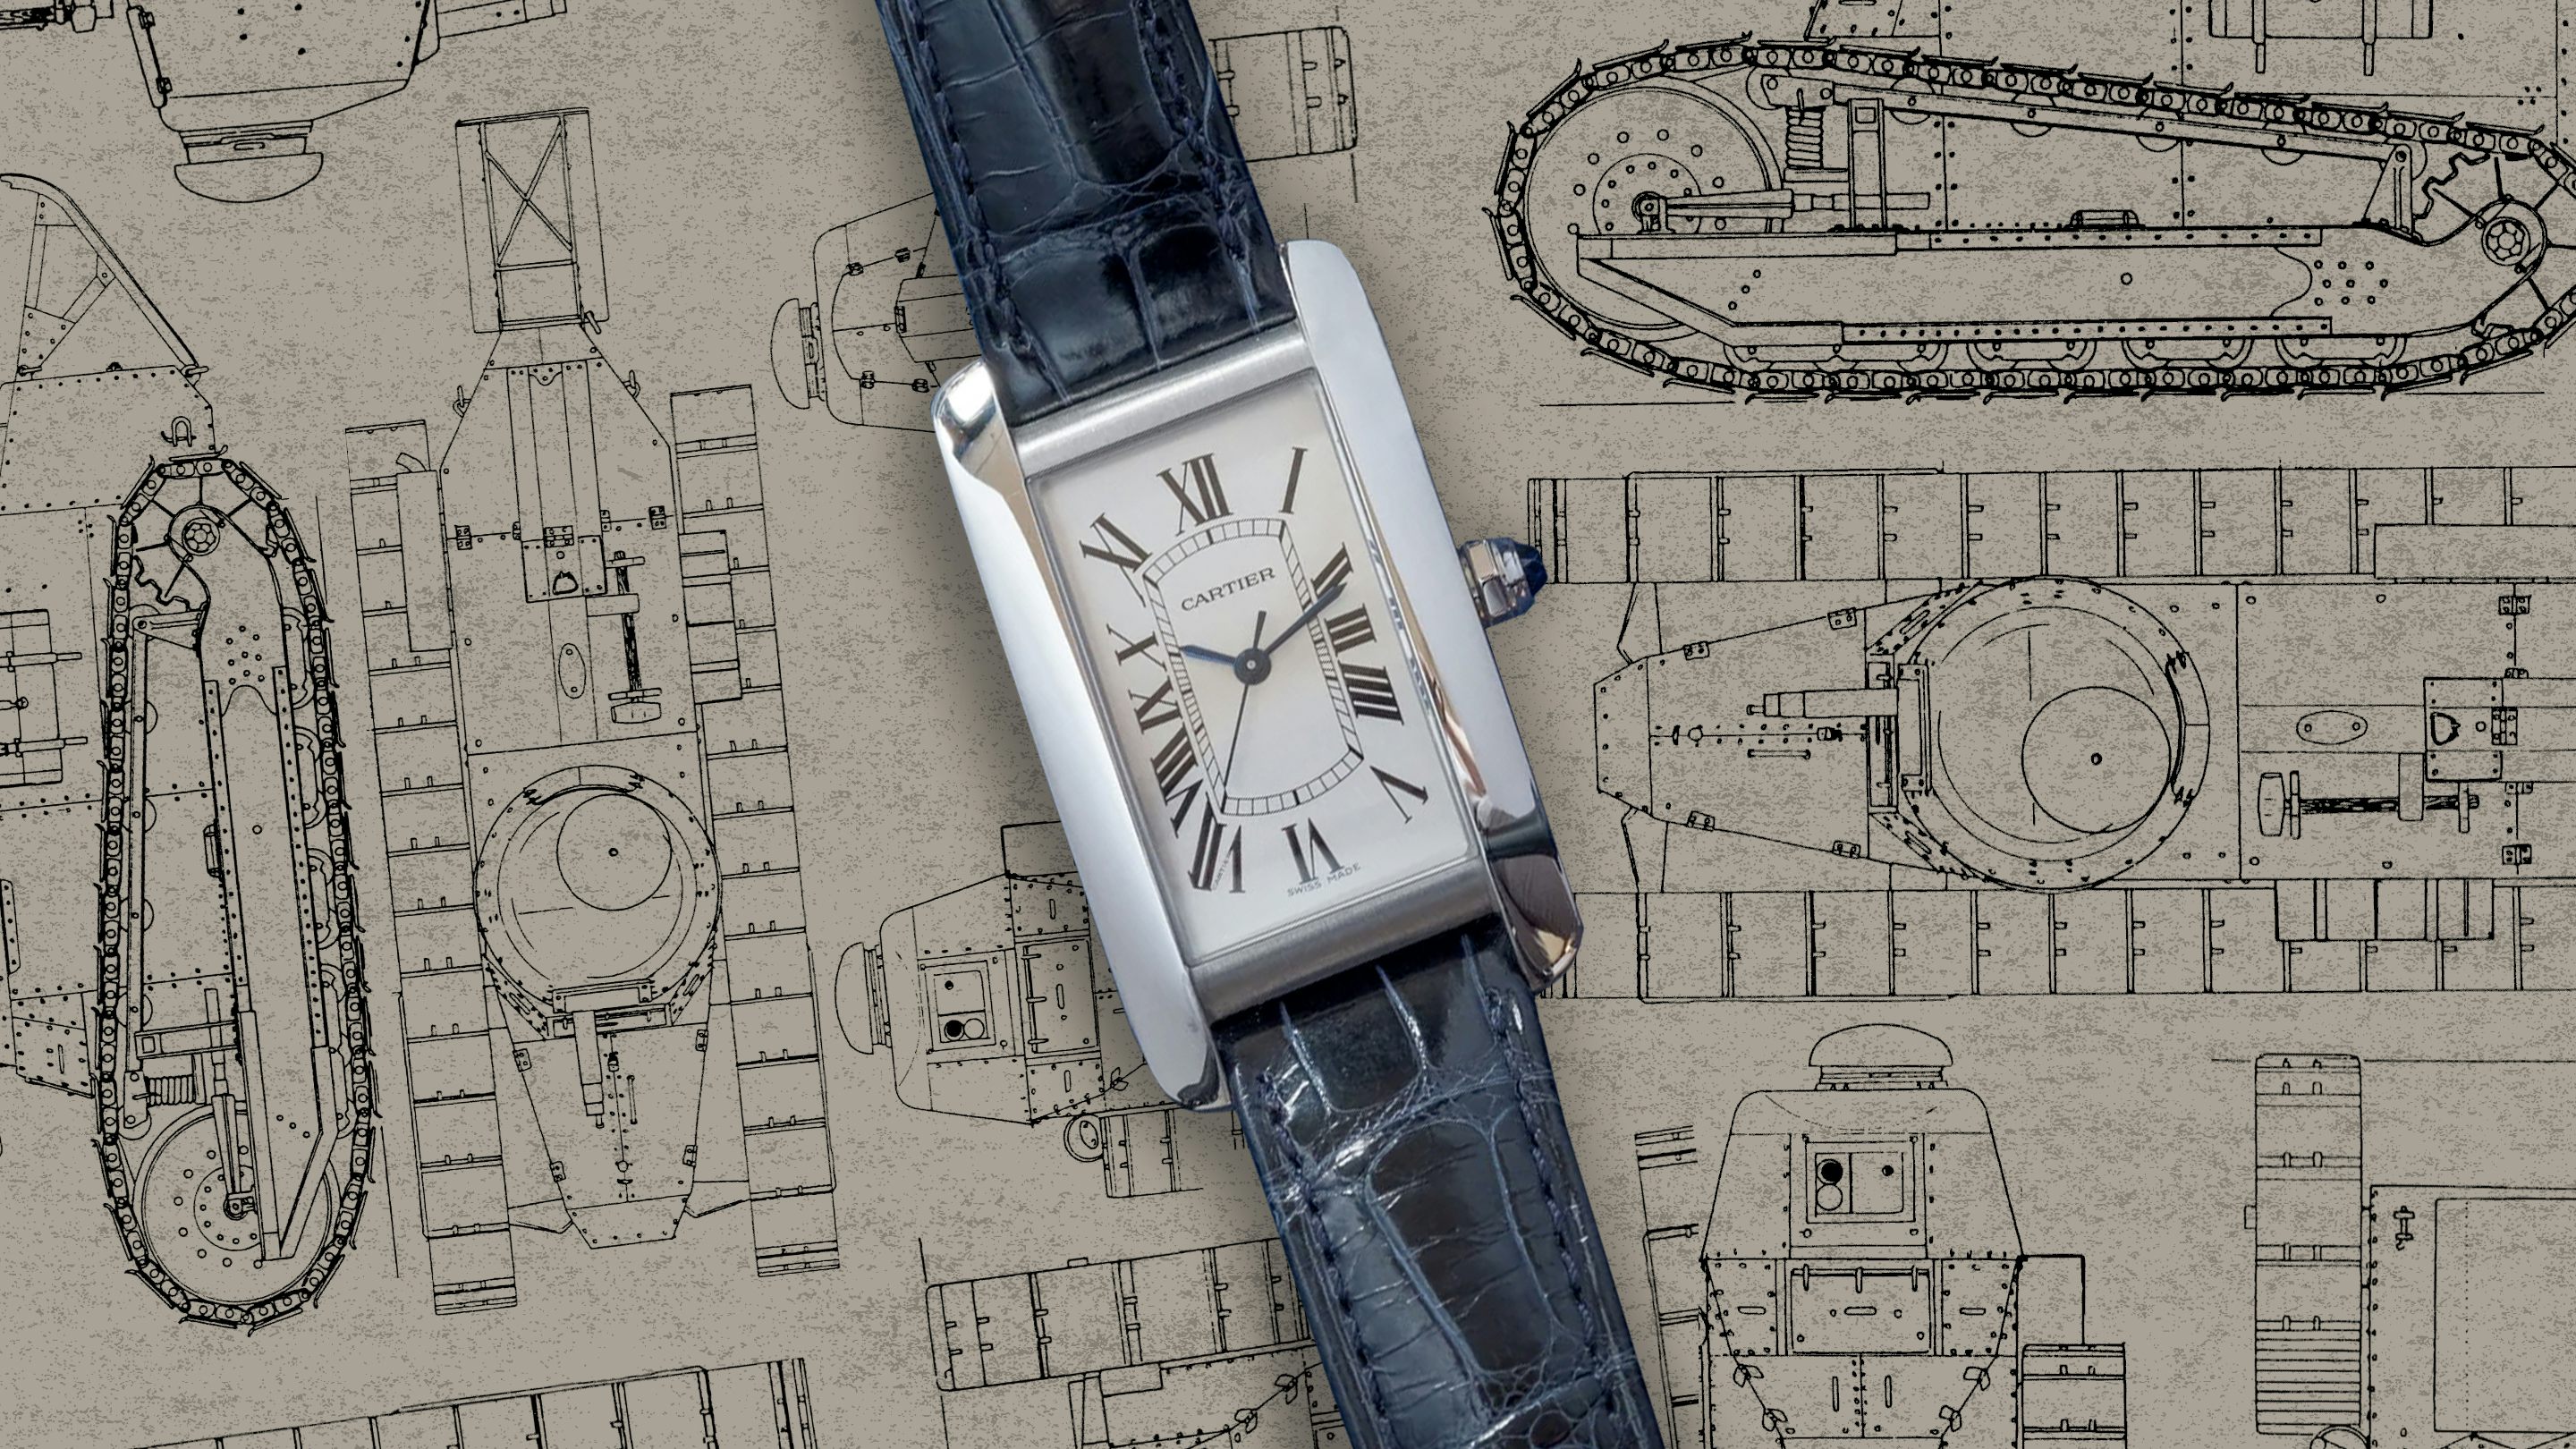 Cartier updates its iconic Tank watches for 2021